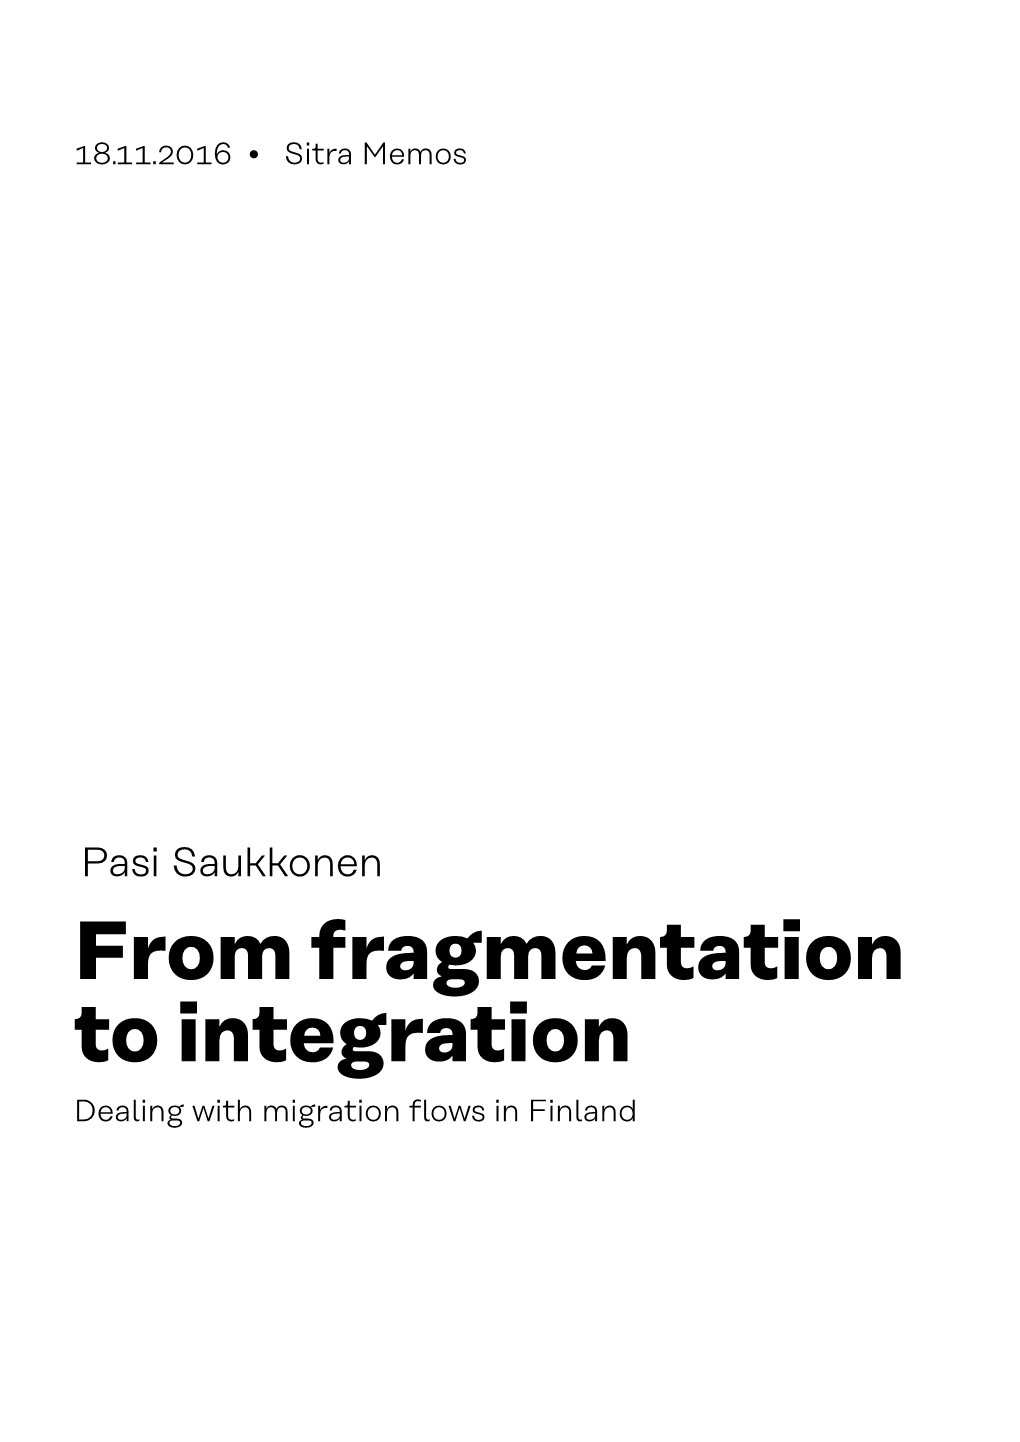 Pasi Saukkonen from Fragmentation to Integration Dealing with Migration Flows in Finland from Fragmentation to Integration Dealing with Migration Flows in Finland 2